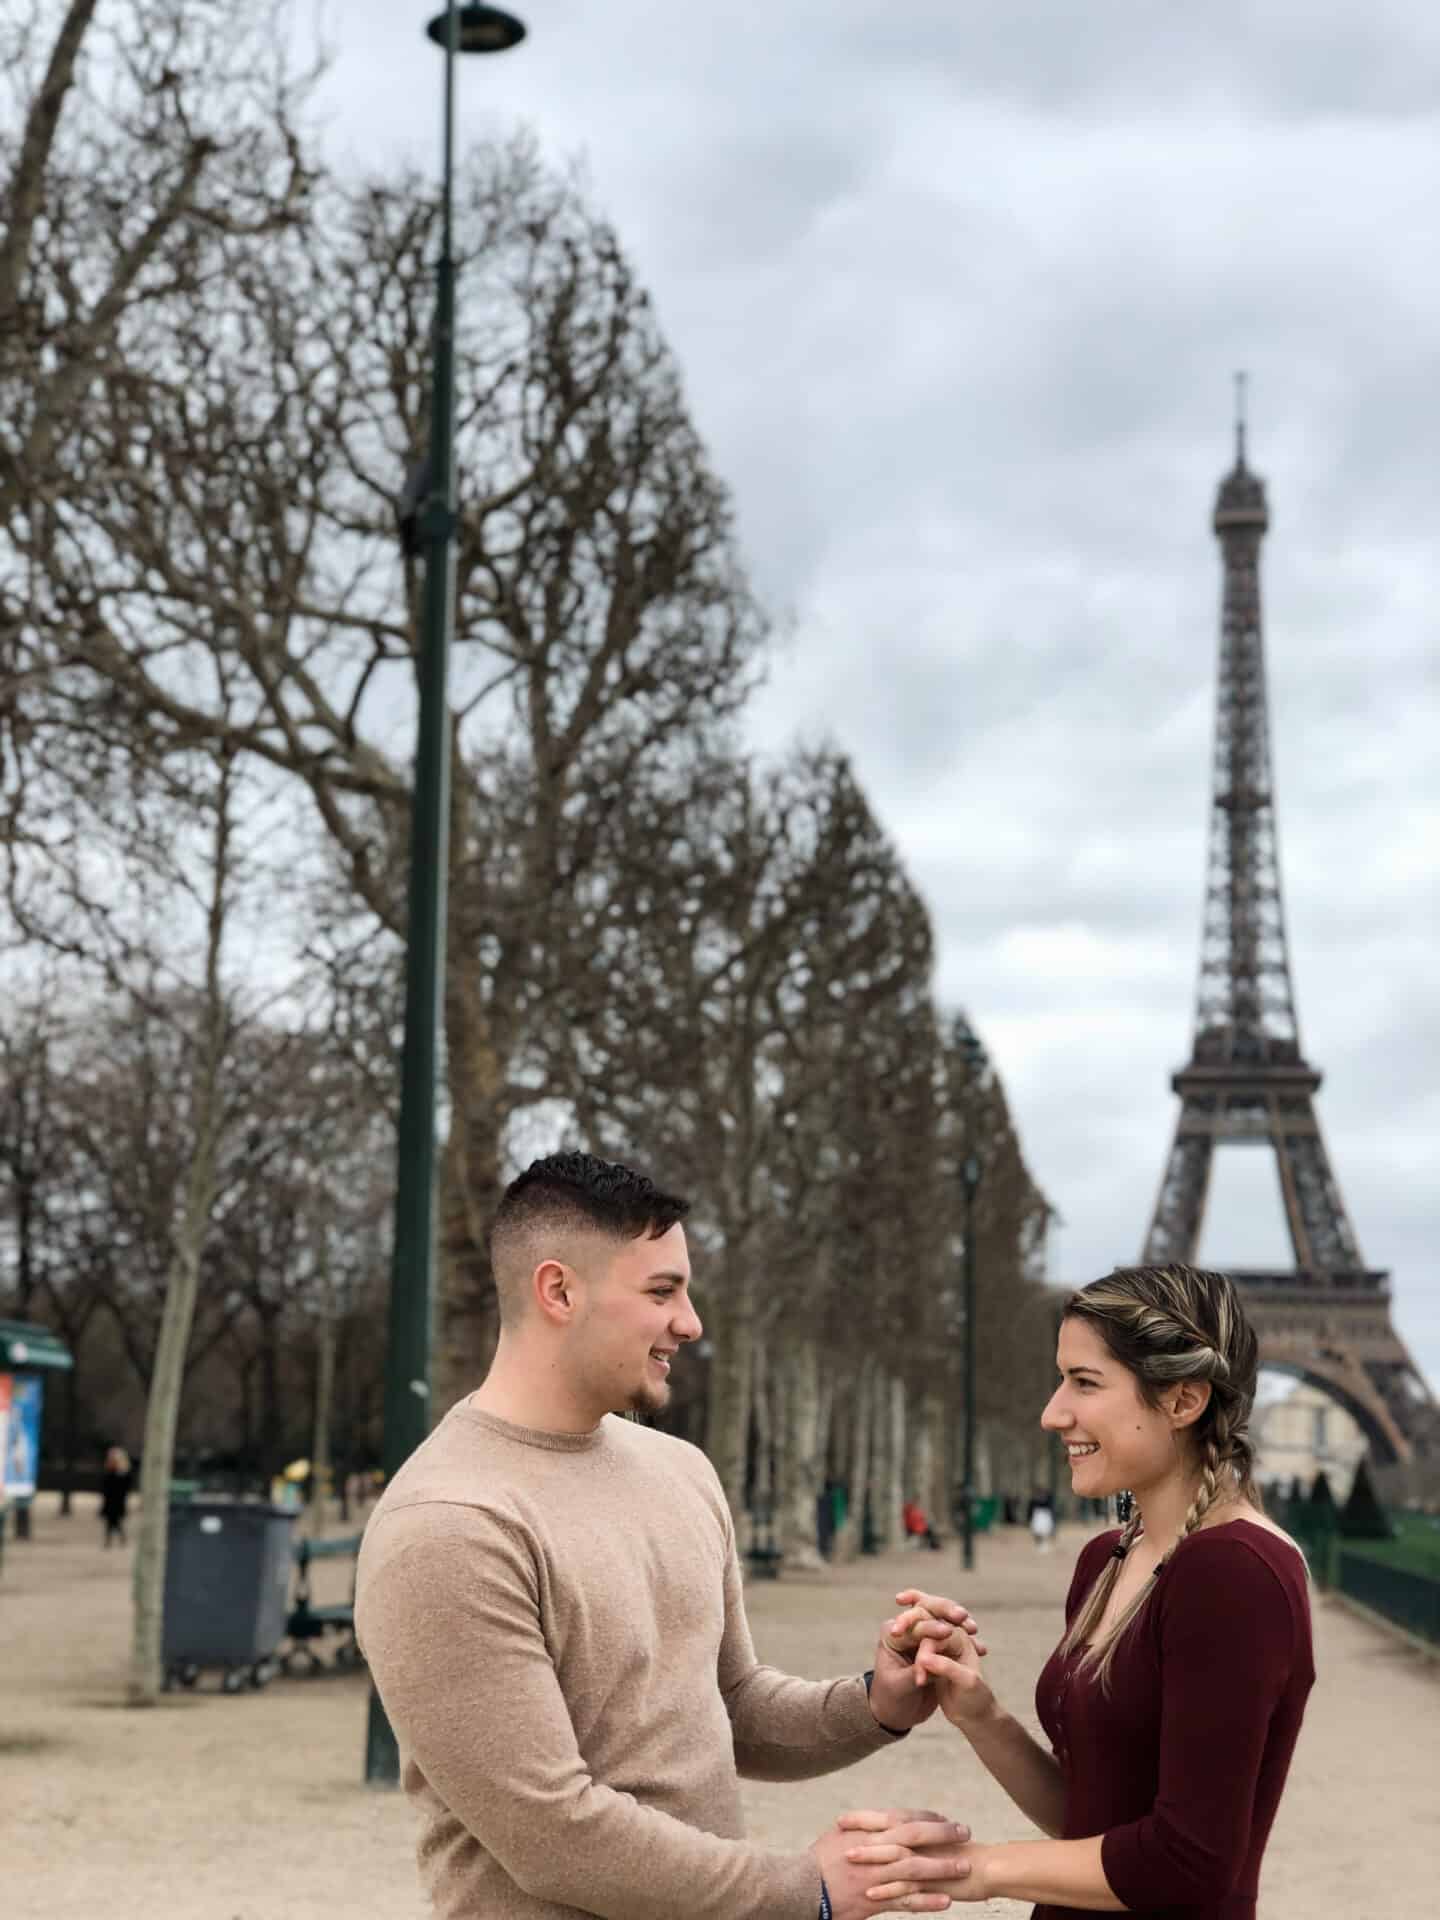 Couple holding hands at Eiffel Tower in Paris